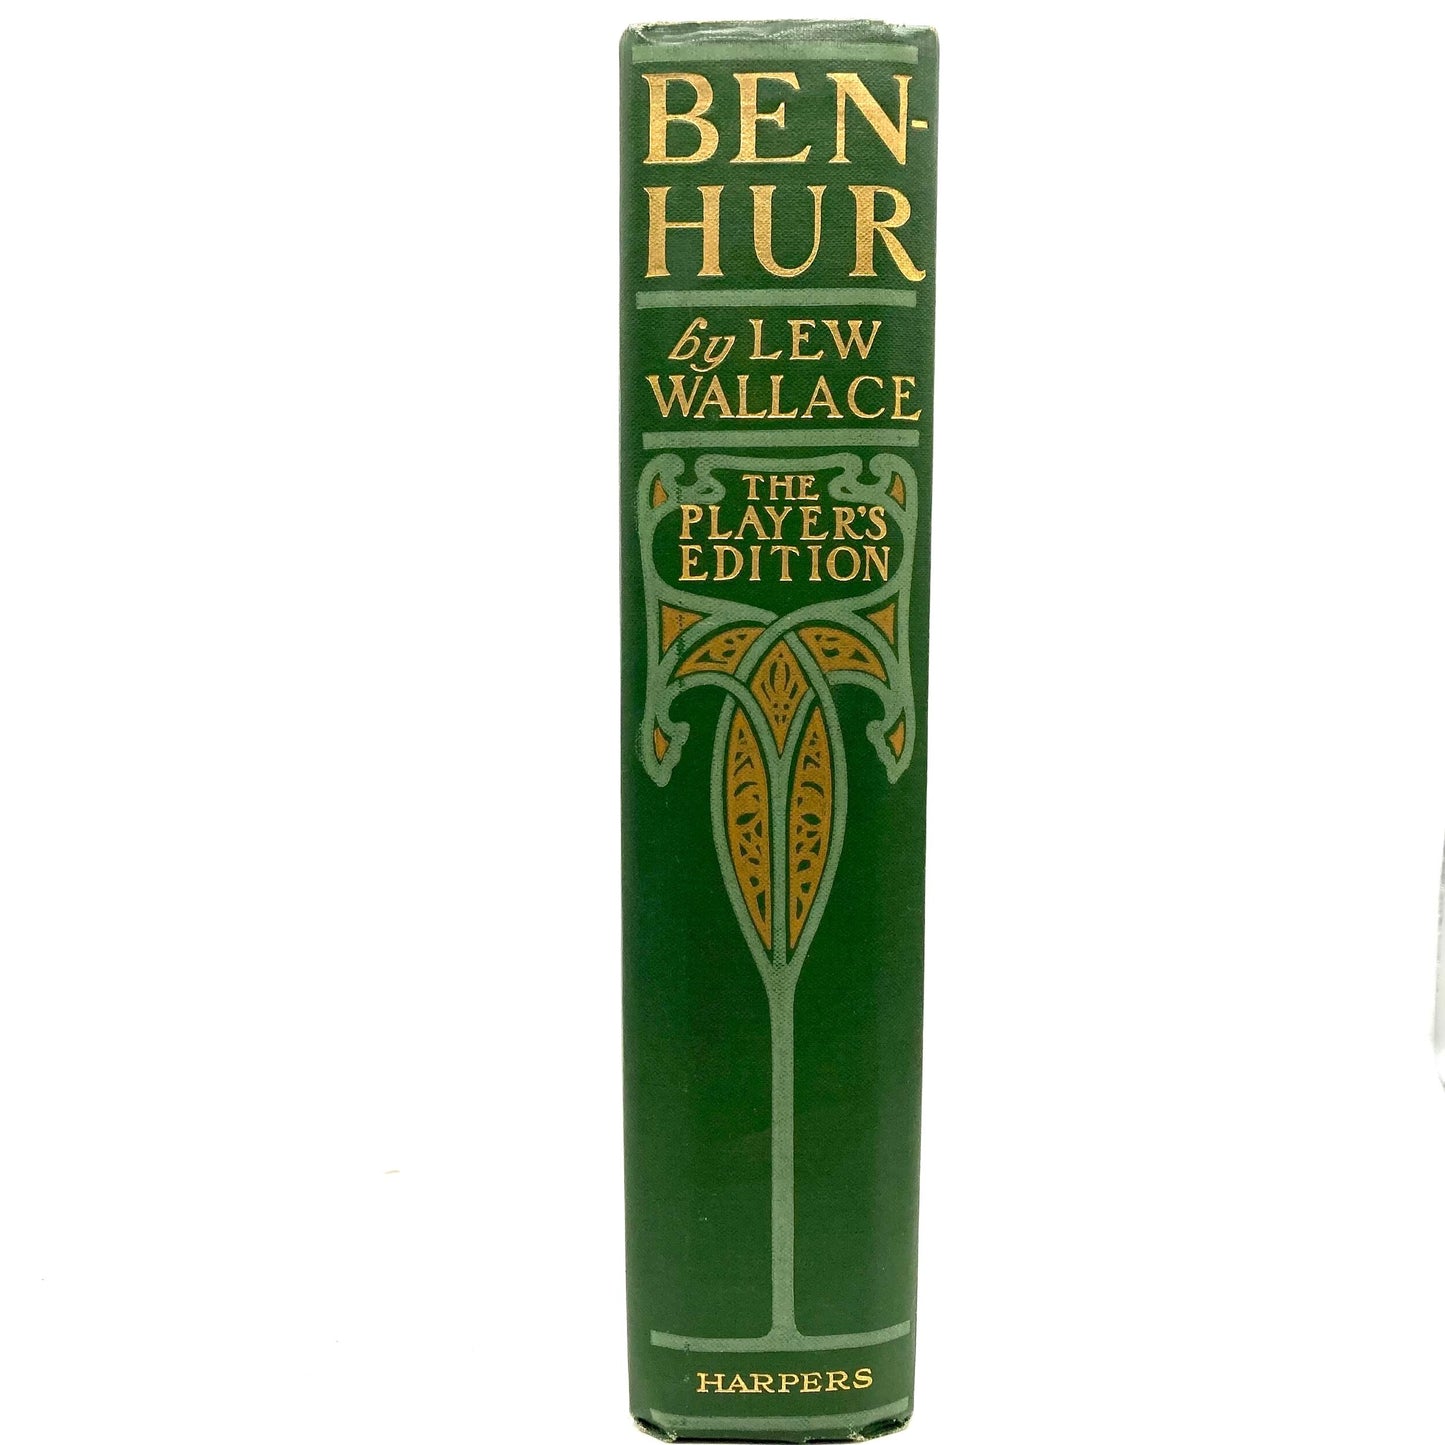 WALLACE, Lew "Ben-Hur" [Harper & Brothers, 1901] - Buzz Bookstore